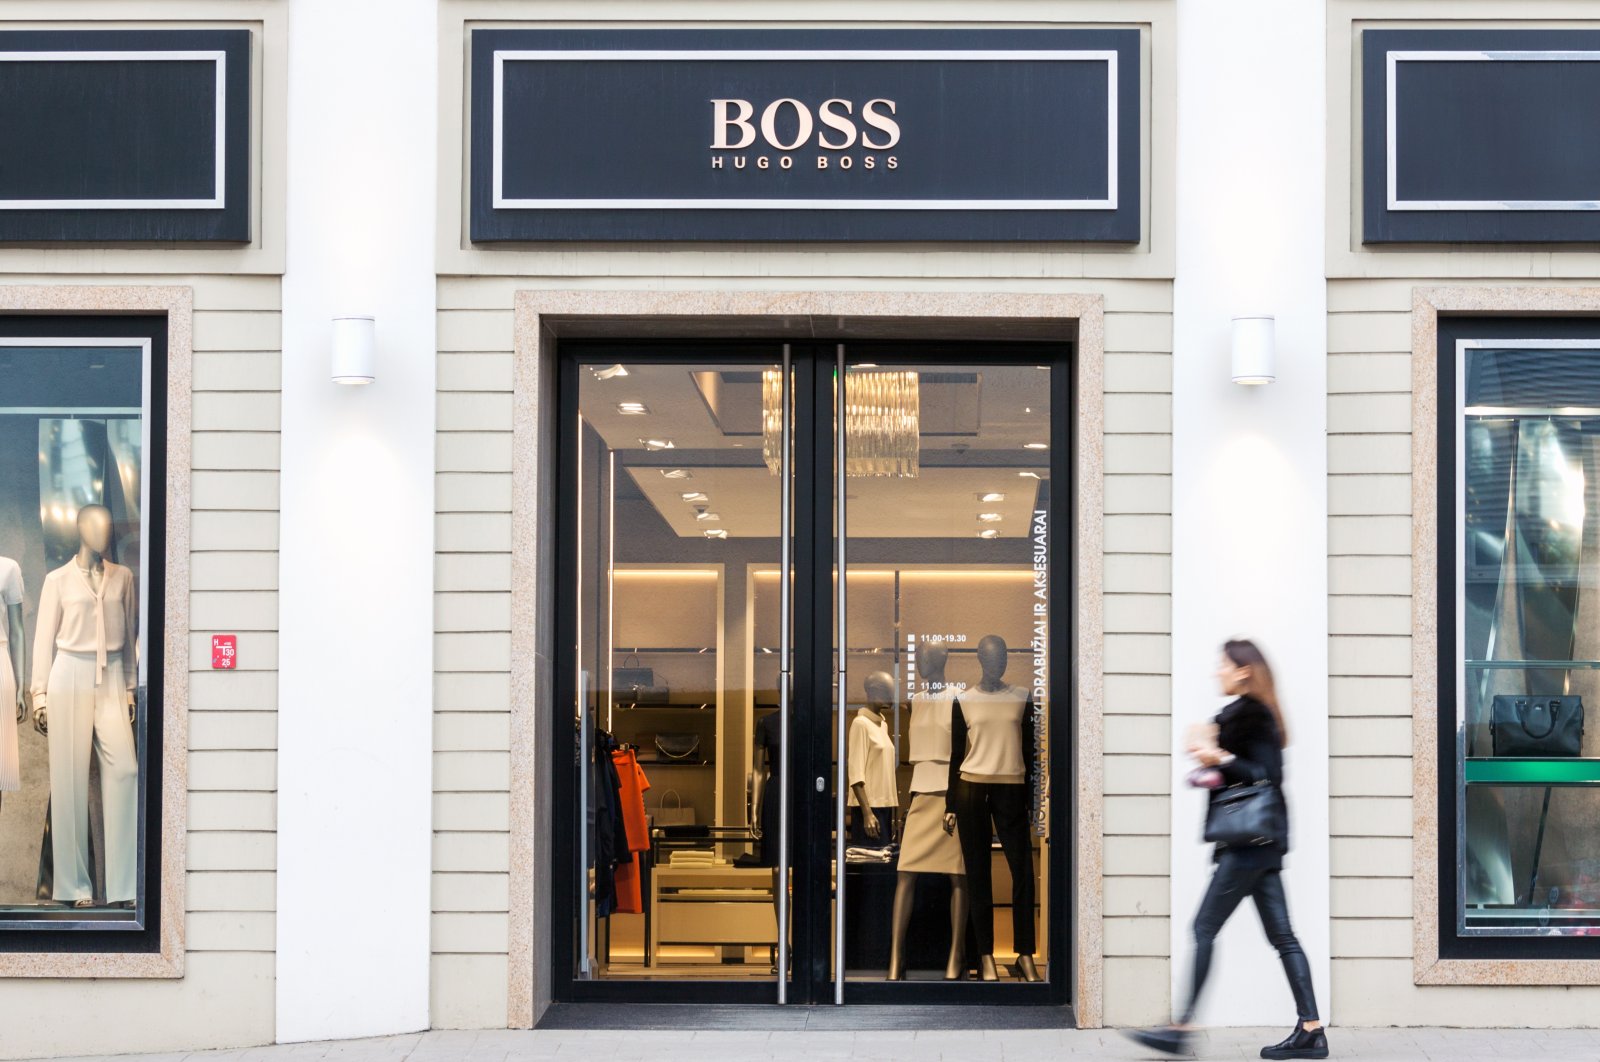 A Hugo Boss store in Vilnius, Lithuania, May 3, 2016. (Shutterstock Photo)